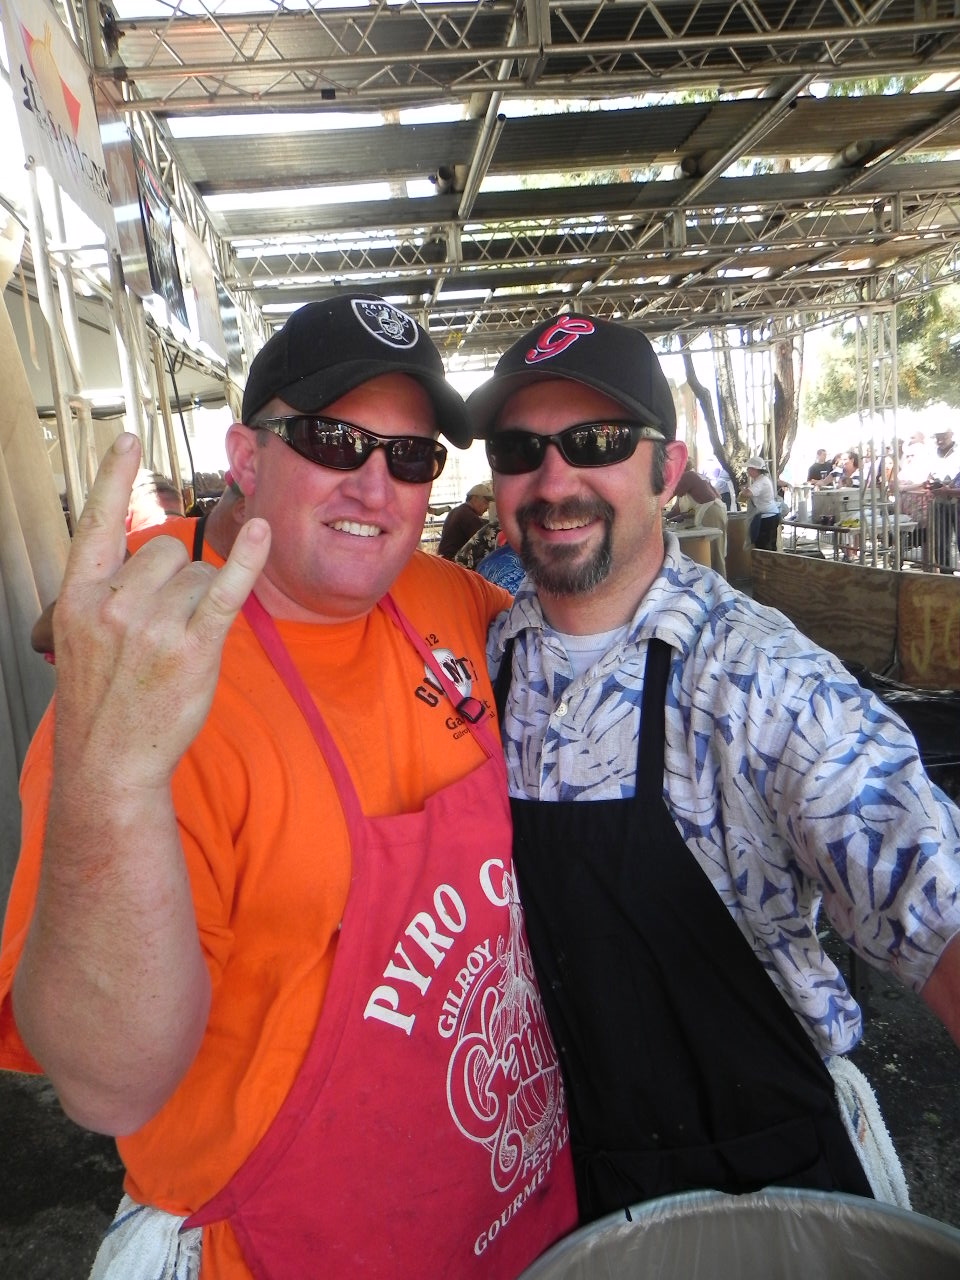 Rich Janisch (left) and Scott Povio (right) of Gilroy have been volunteering at the festival for years. Neither are professional chefs. They just love to cook, especially with garlic. Photo: Gina Scialabba